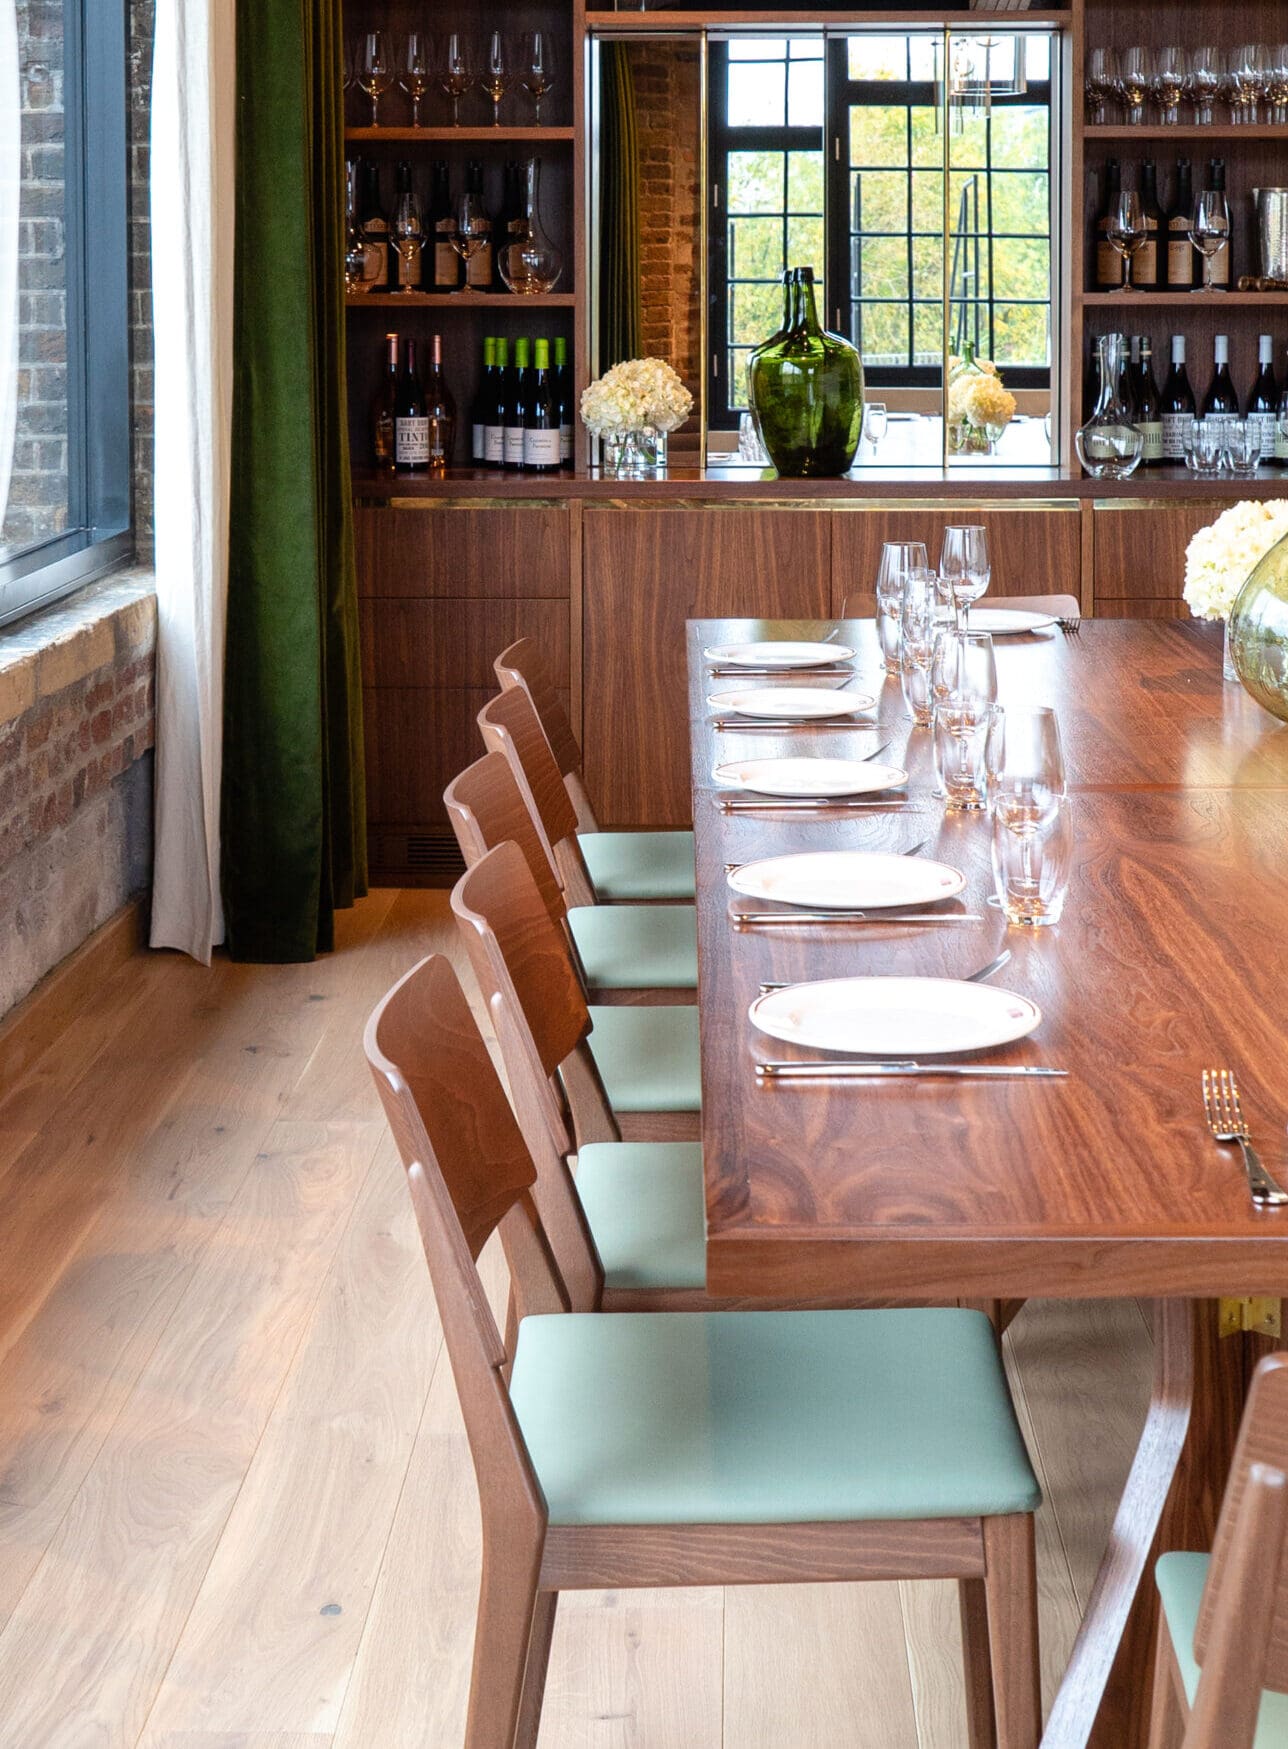 The best private dining rooms in London | Wooden tables and chairs at the private dining room of Barrafina in Borough Market